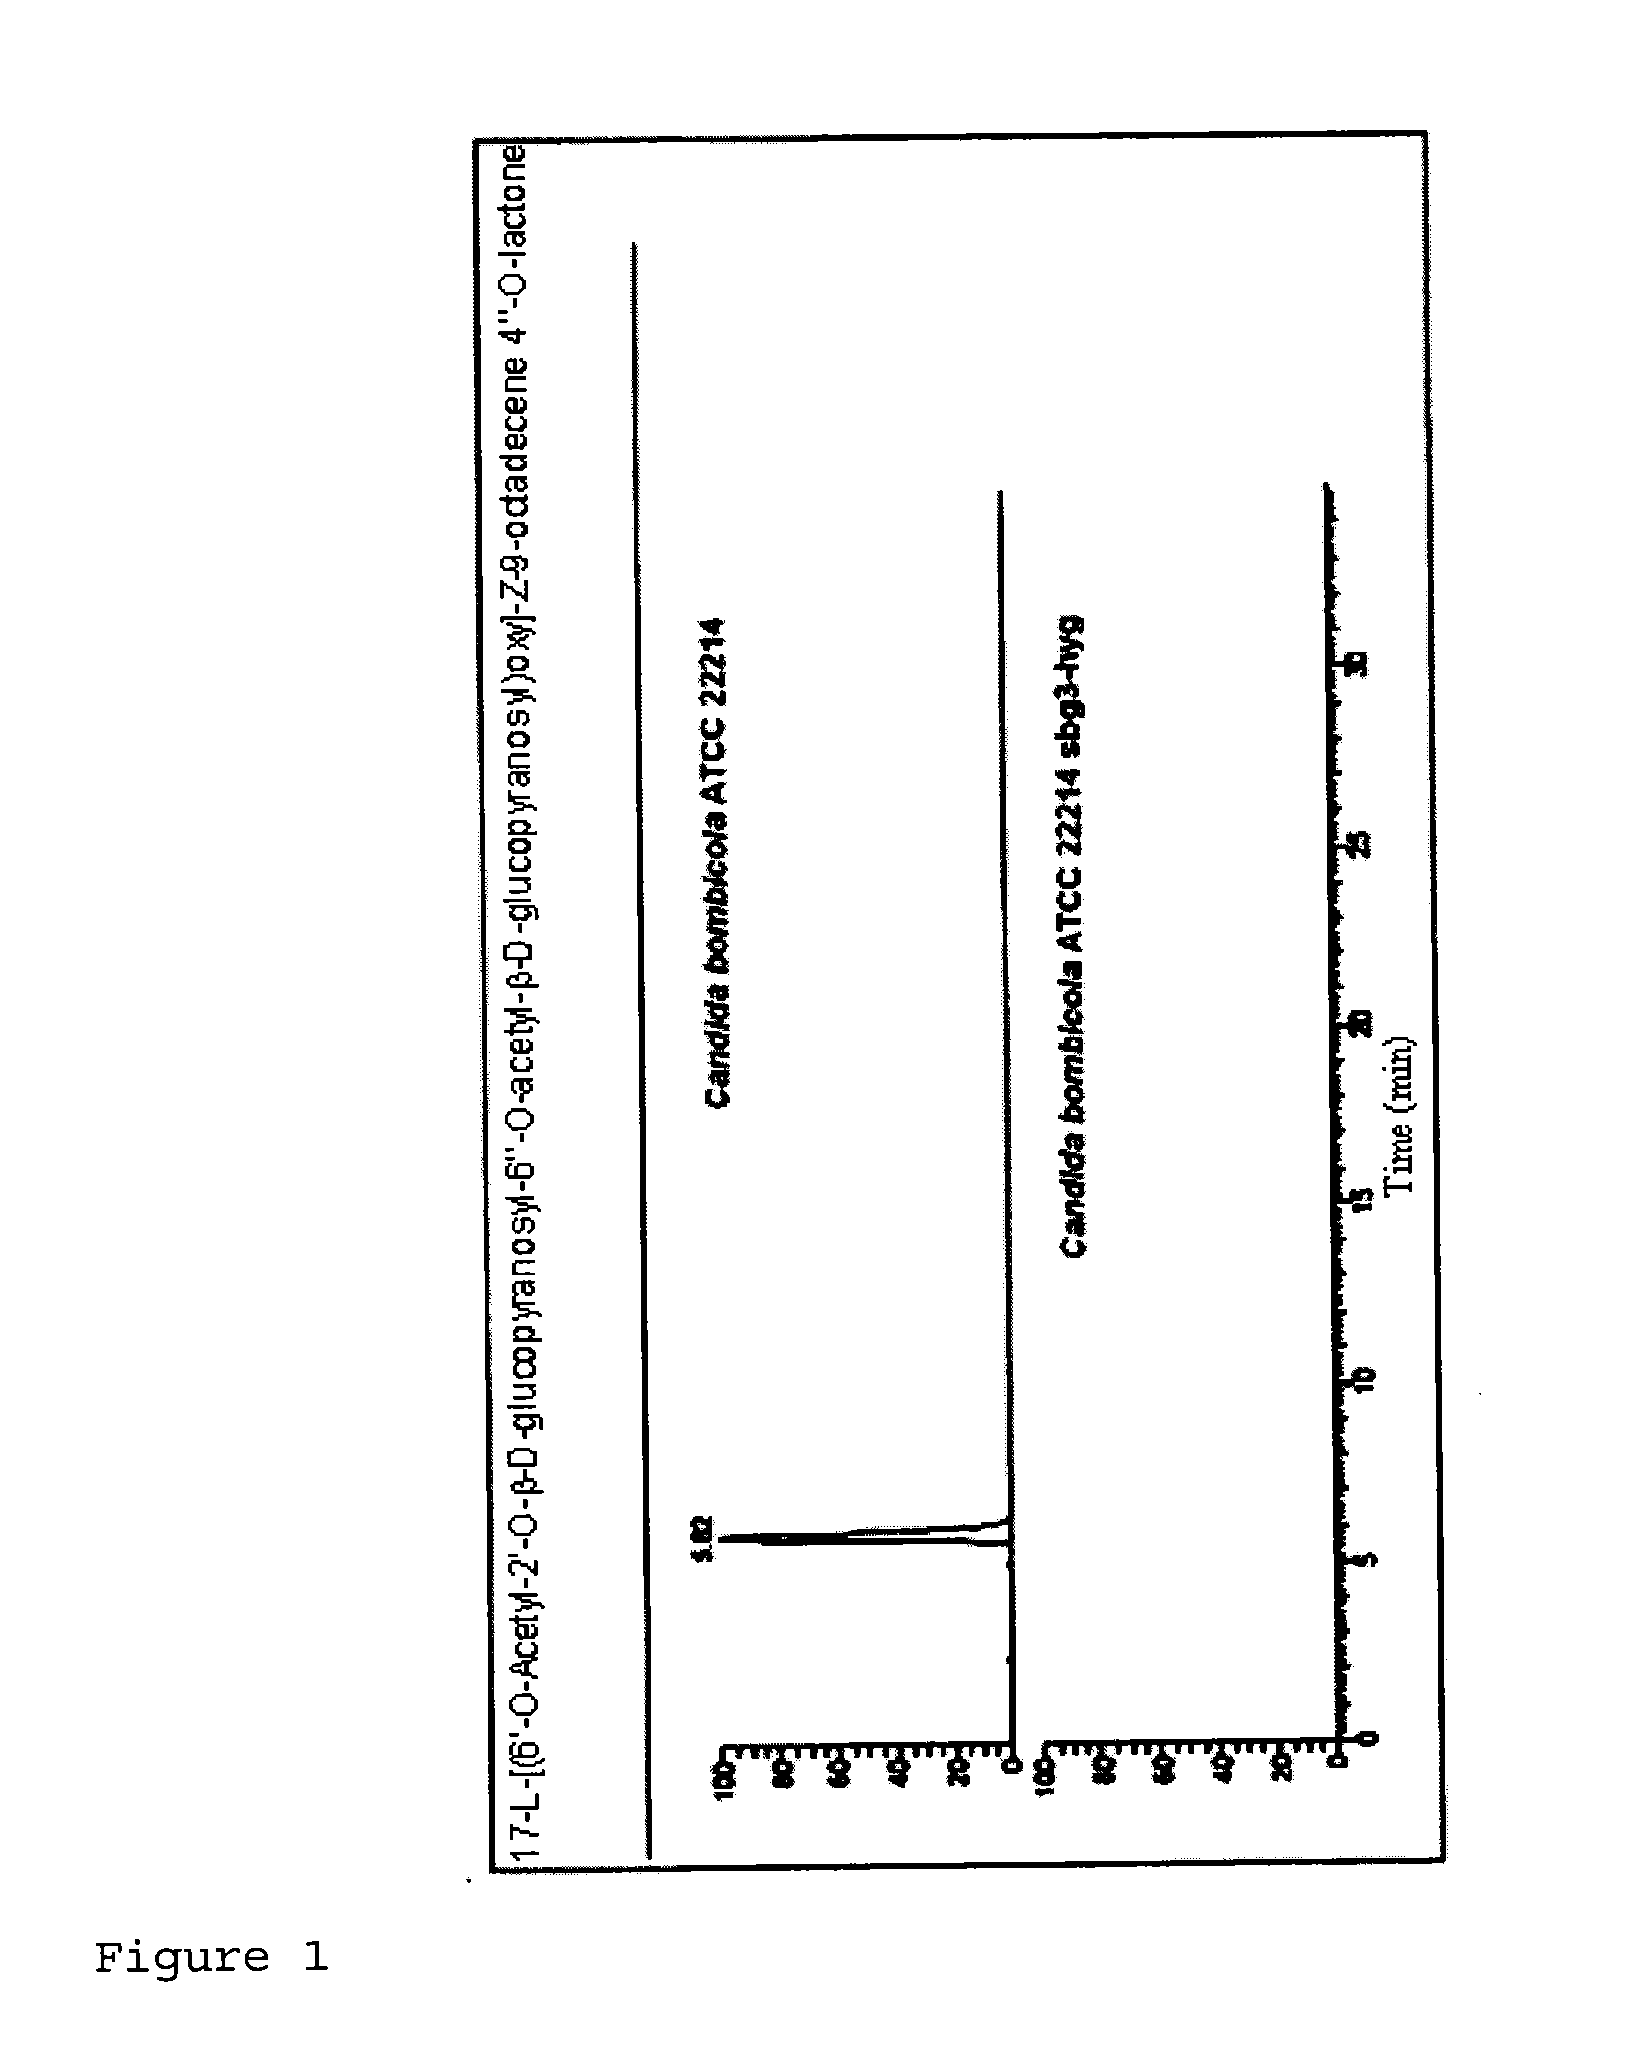 Cells, nucleic acids, enzymes and use thereof, and methods for the production of sophorolipids